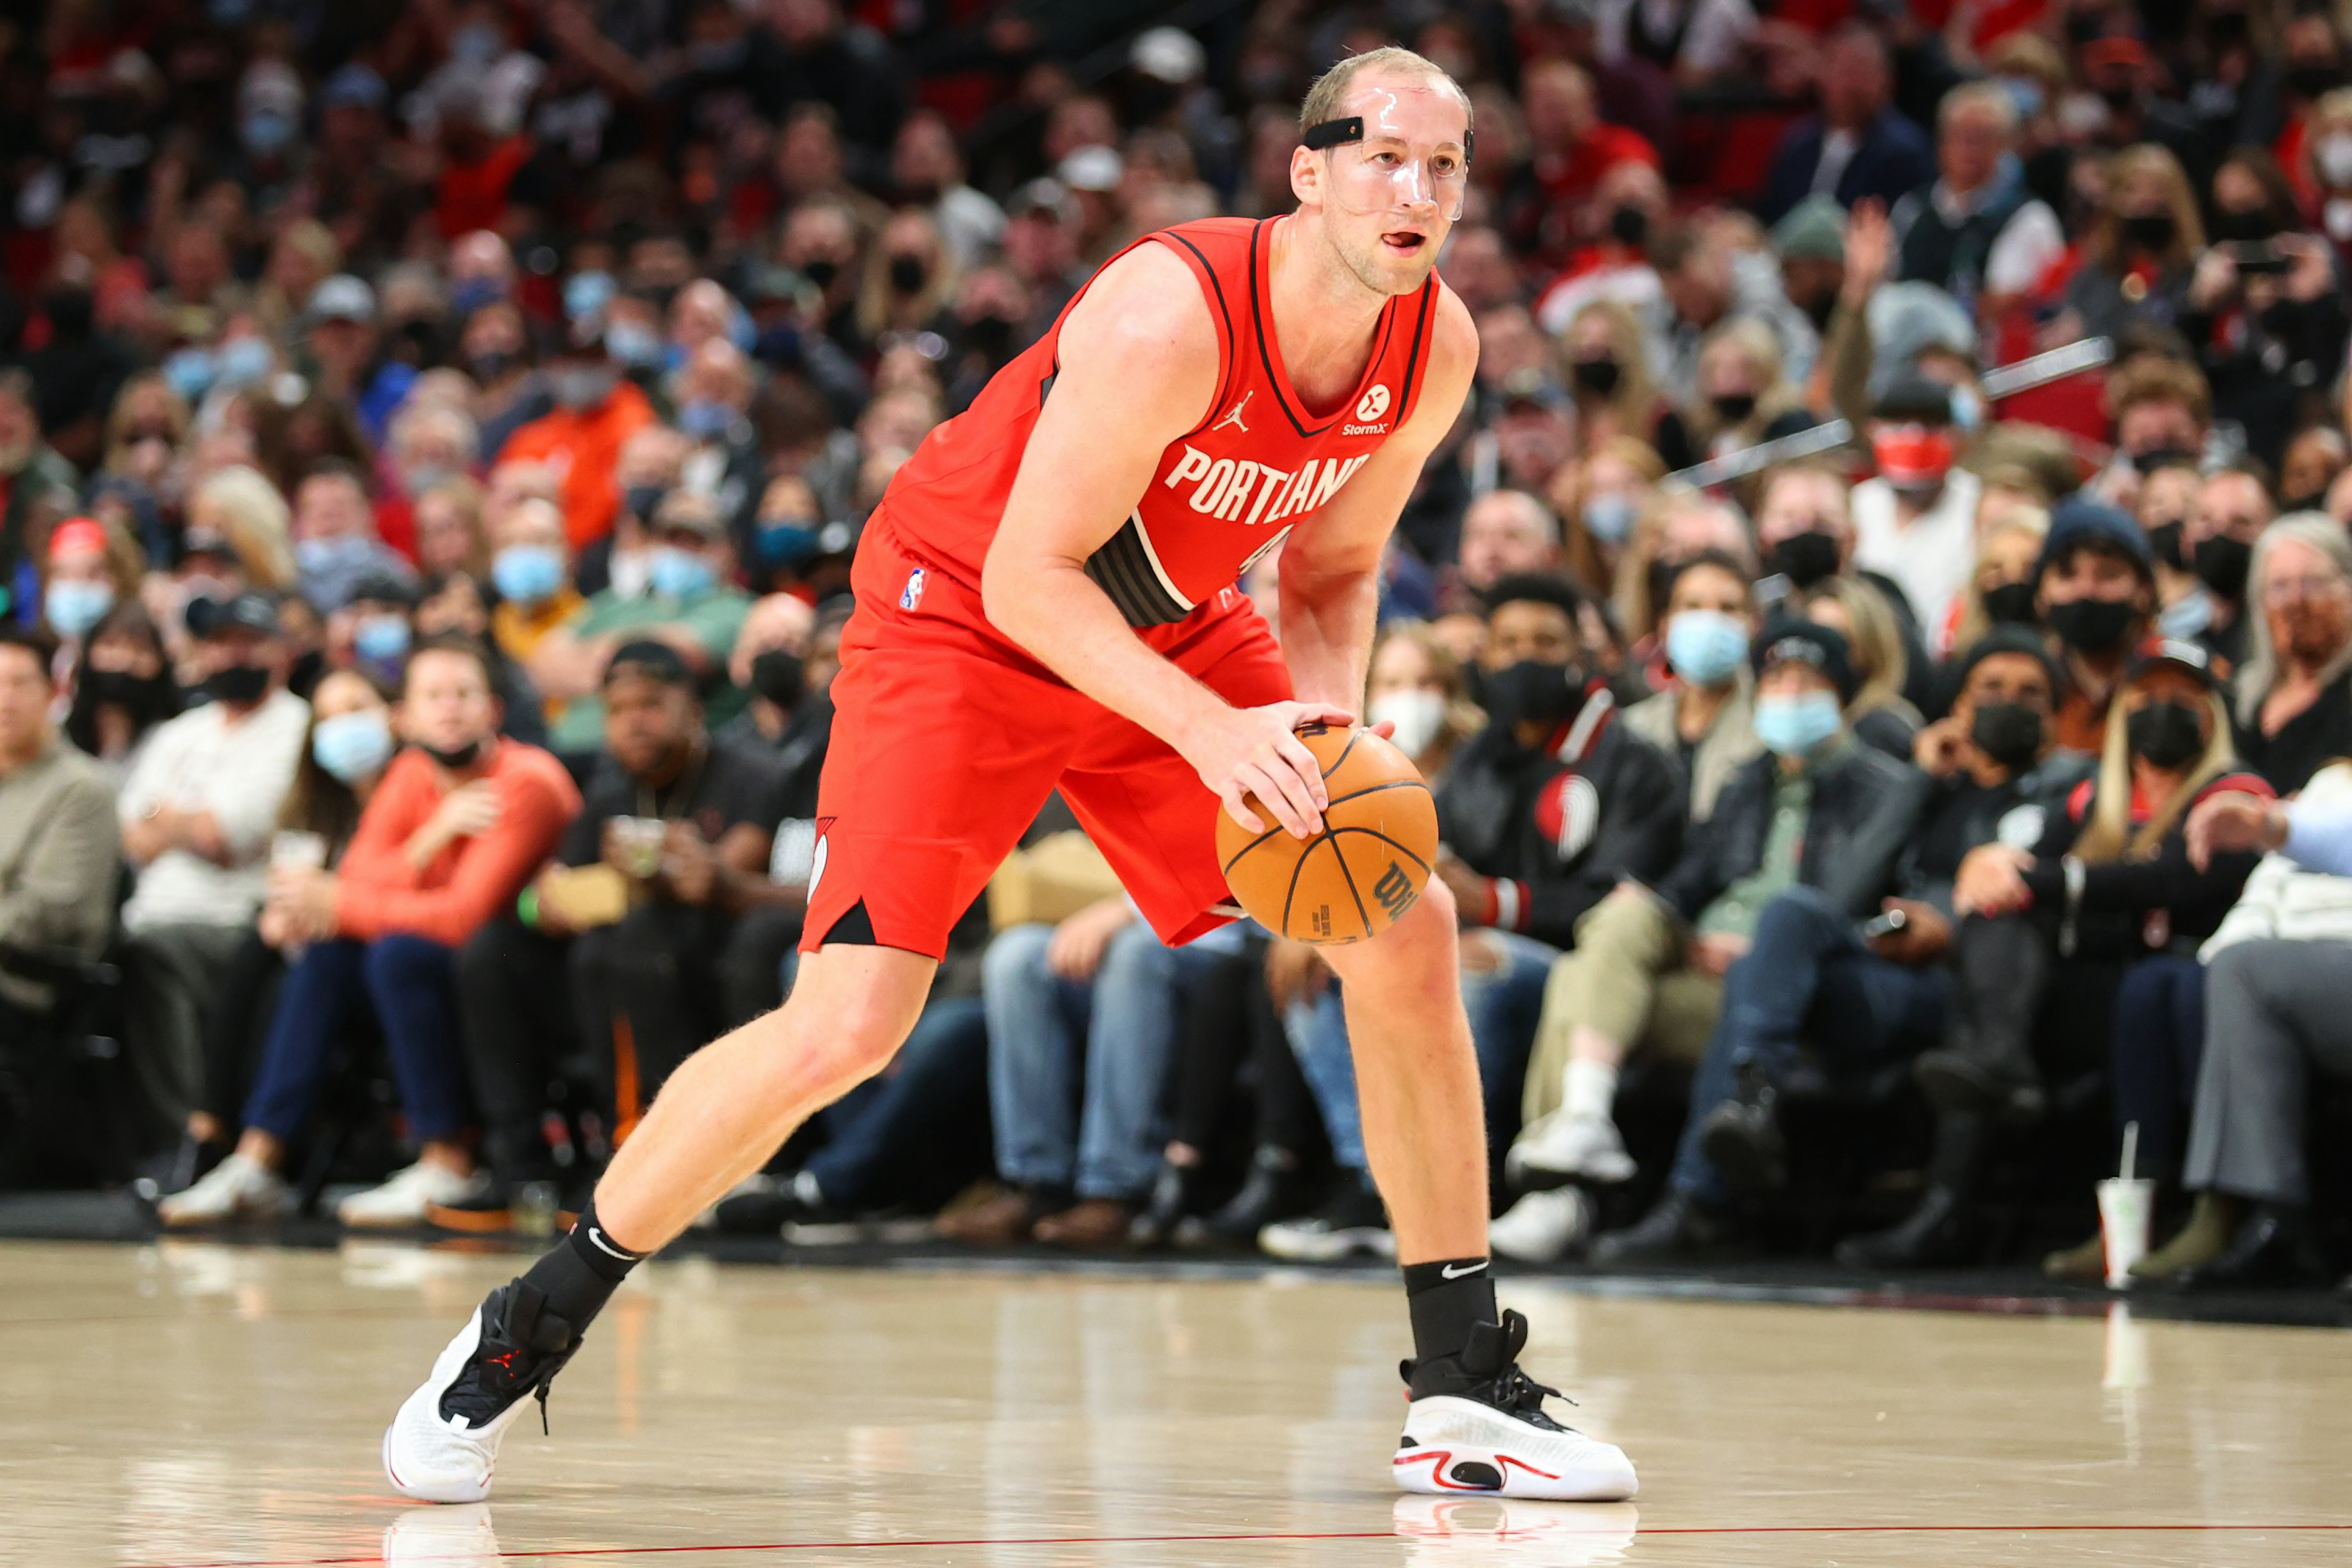 Cody Zeller is getting bigger and better, according to everybody